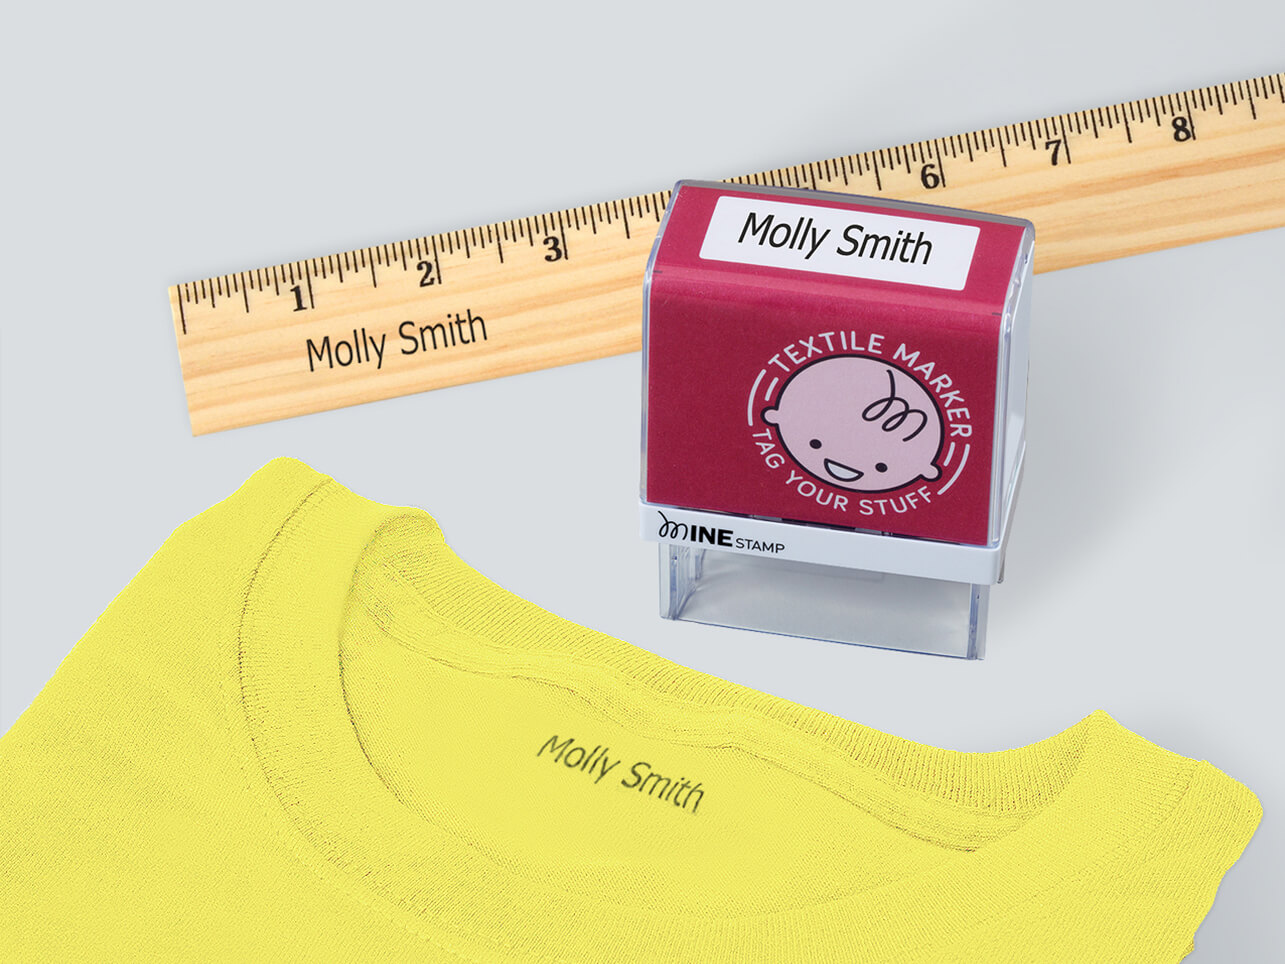 TOP SELLING Custom Clothing Stamp Personalized Fabric Stamp Self Inking Stamp  for Kids Clothing, Camp, School Uniforms 